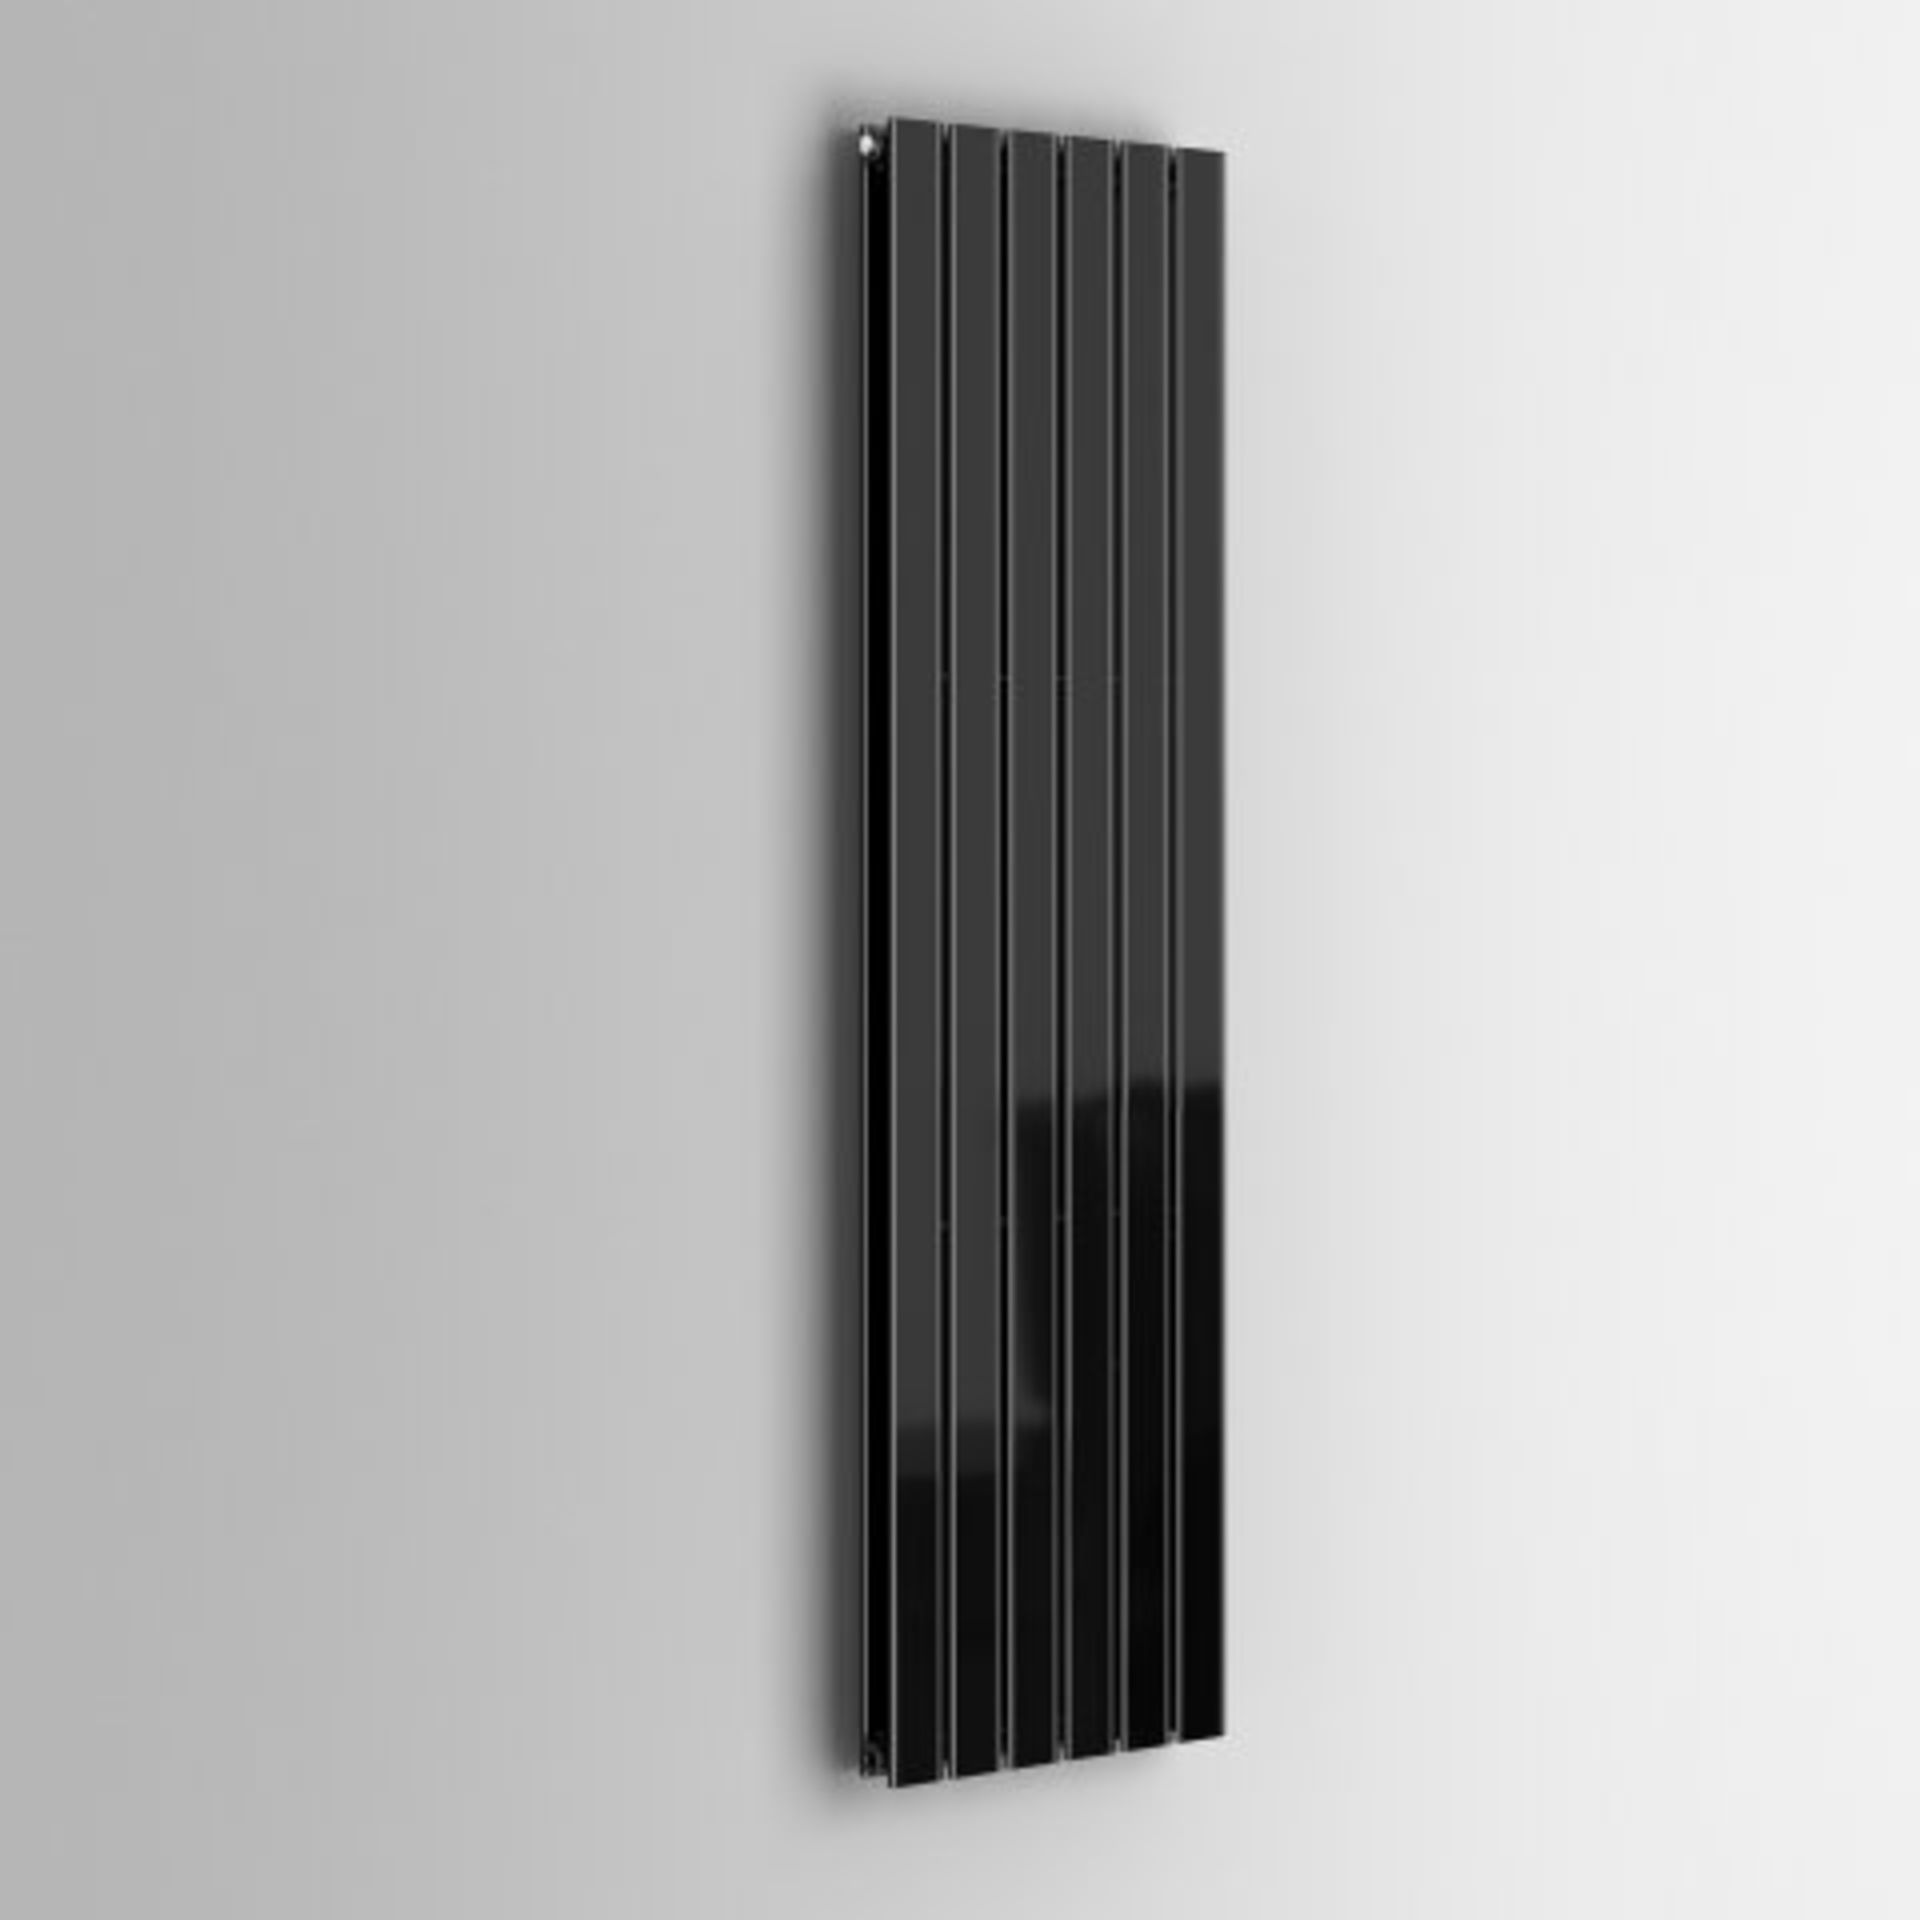 (AA165) 1800x458mm Gloss Black Double Flat Panel Vertical Radiator. RRP £499.99. Our Thera Flat - Image 4 of 4